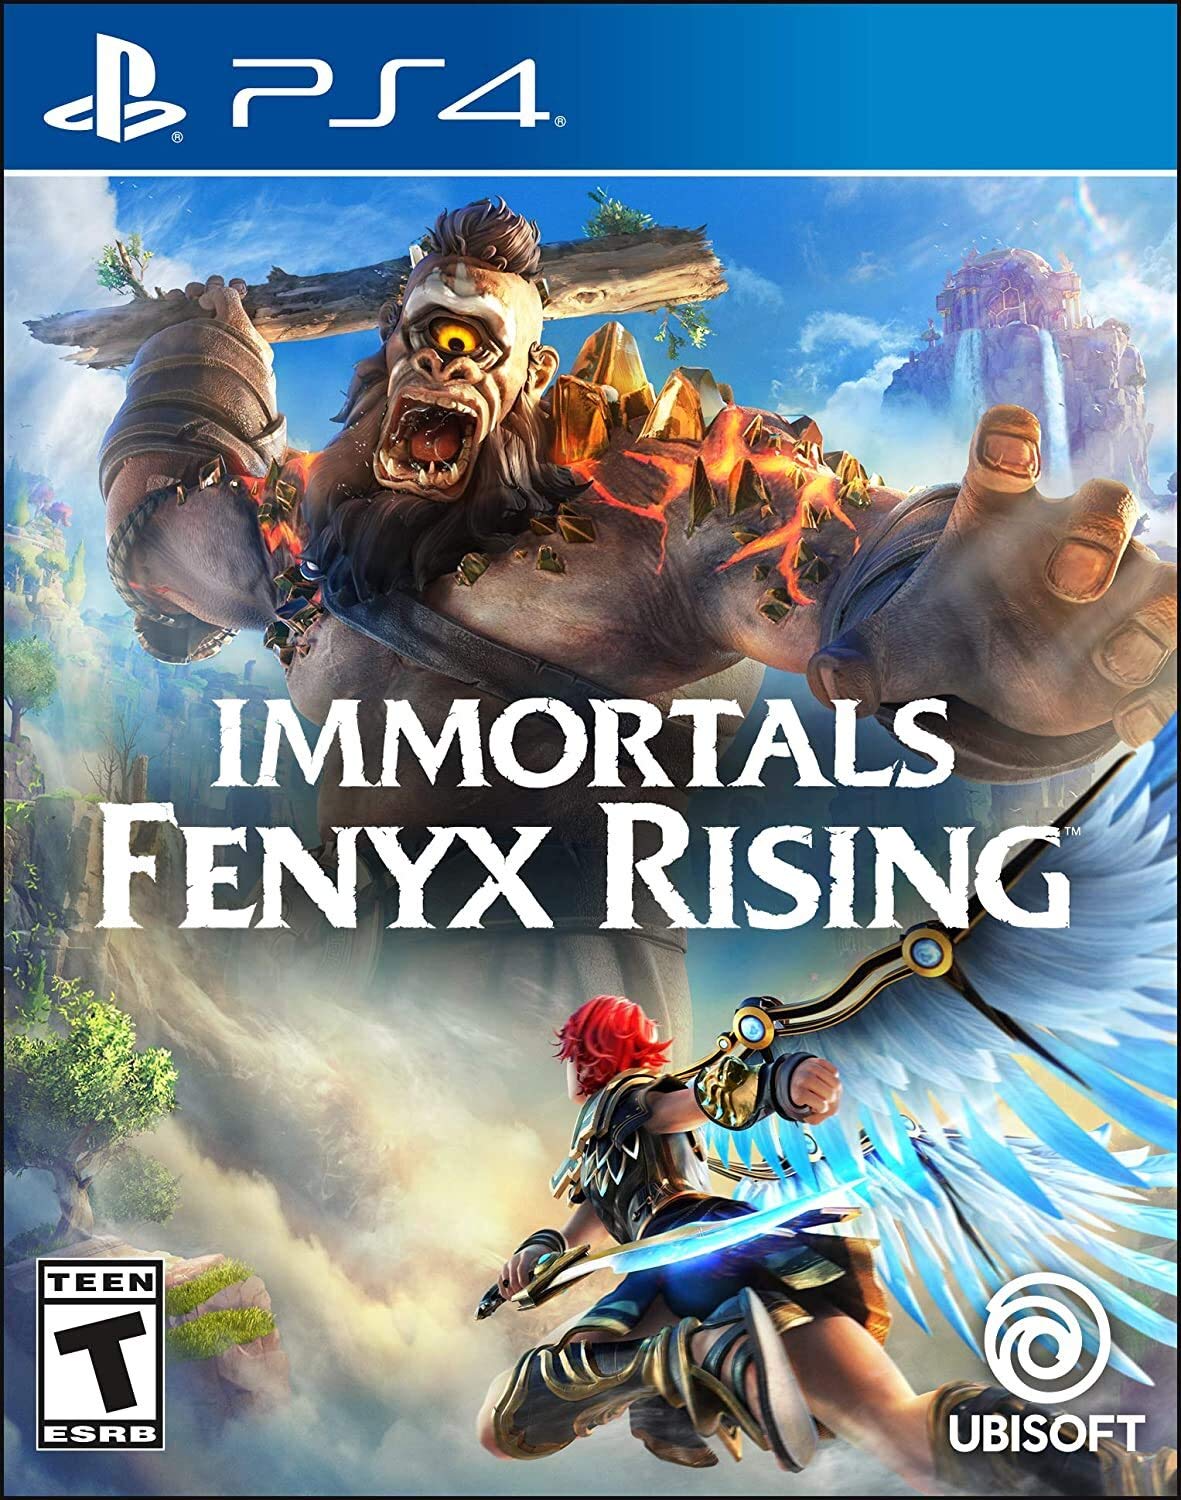 Immortals Fenyx Rising (PS4 Physical) $6.97 + Free Shipping w/ Prime or on Orders $35+